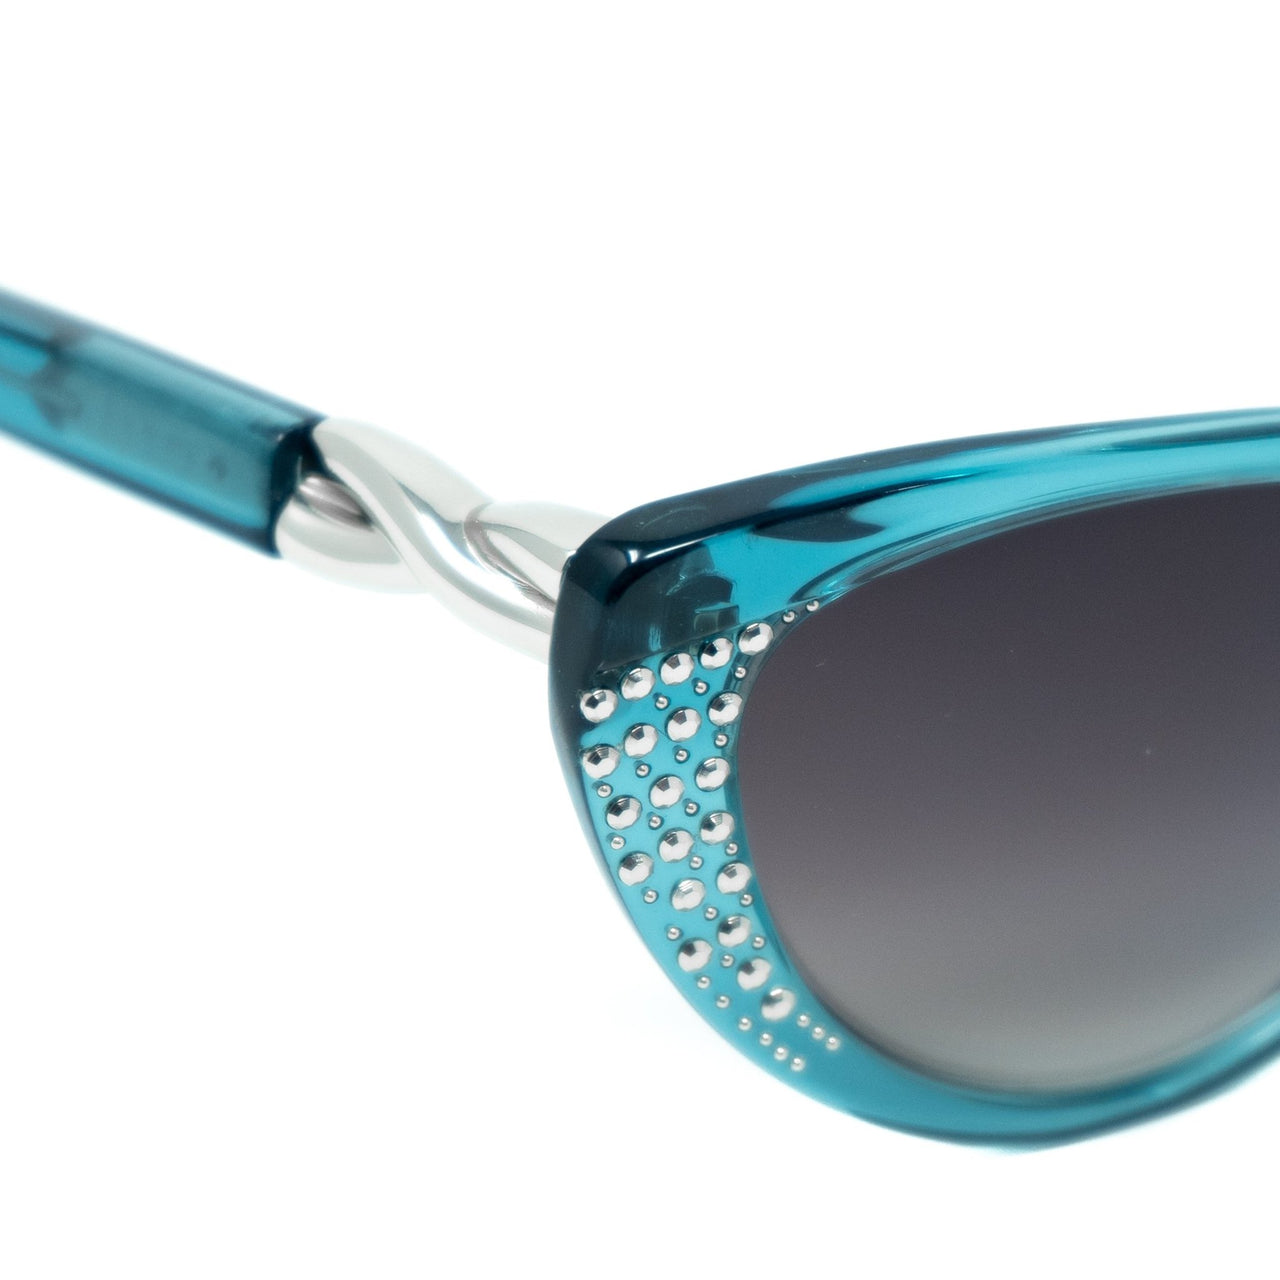 Agent Provocateur Women Sunglasses Cat Eye Blue and Grey Lenses Category 3 - AP19C6SUN - Watches & Crystals